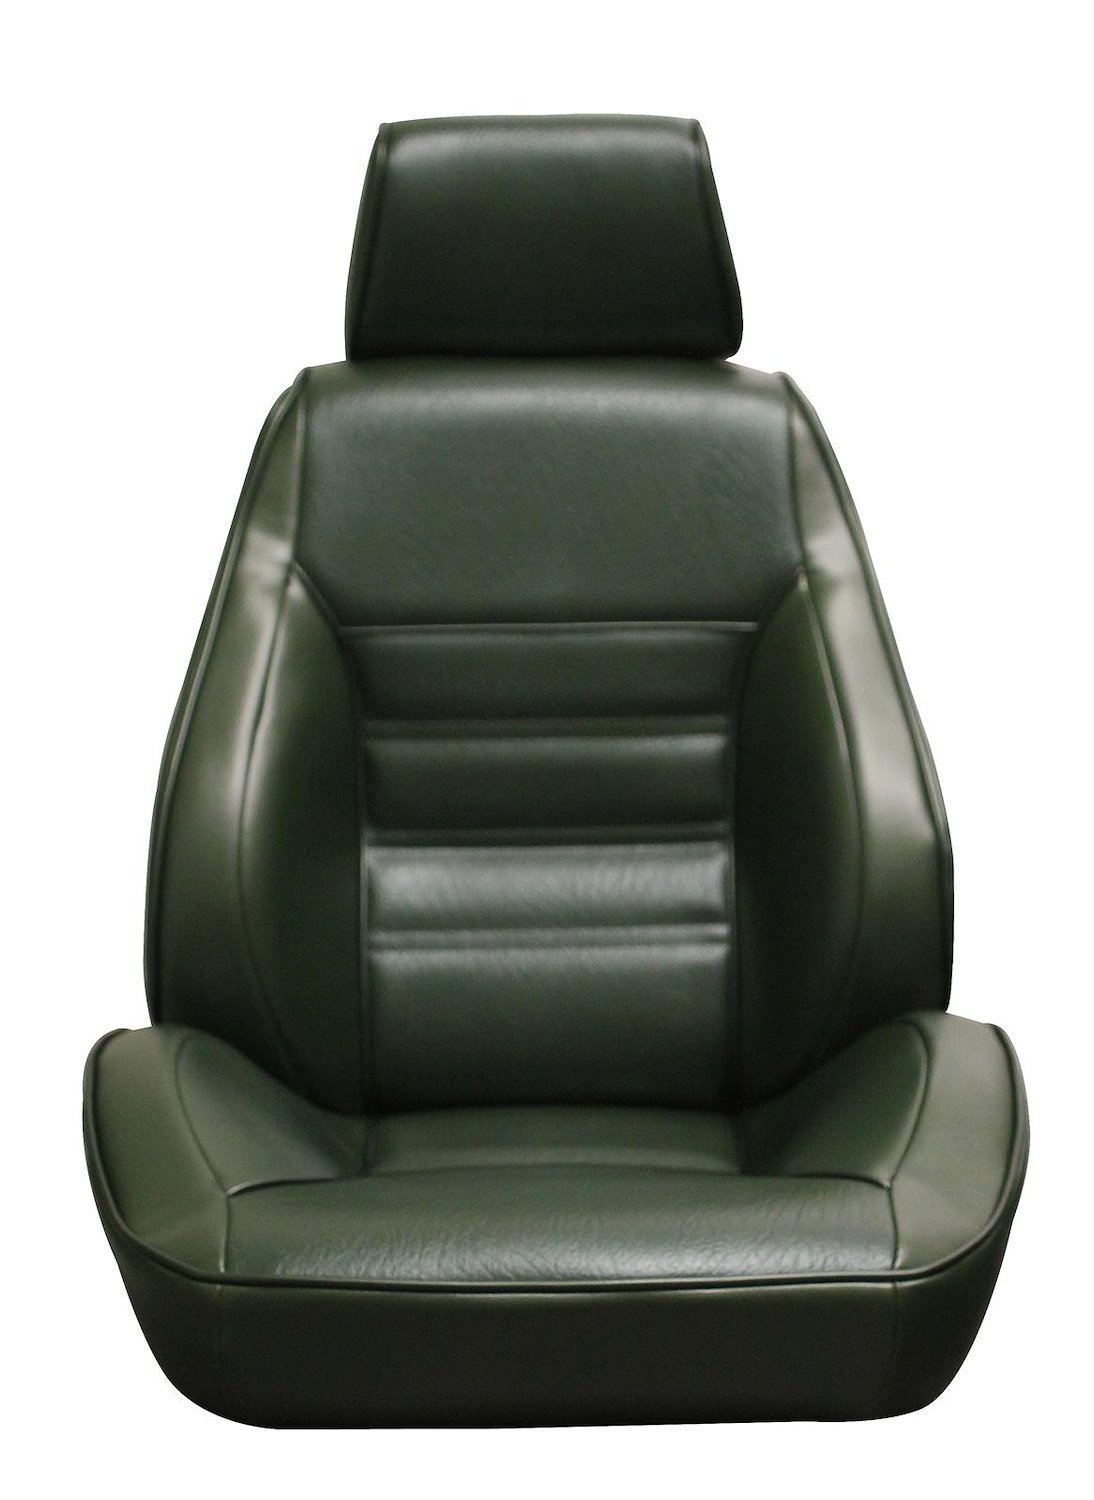 1971-1973 Ford Mustang Standard Interior White Touring II Preassembled Reclining Front Bucket Seats